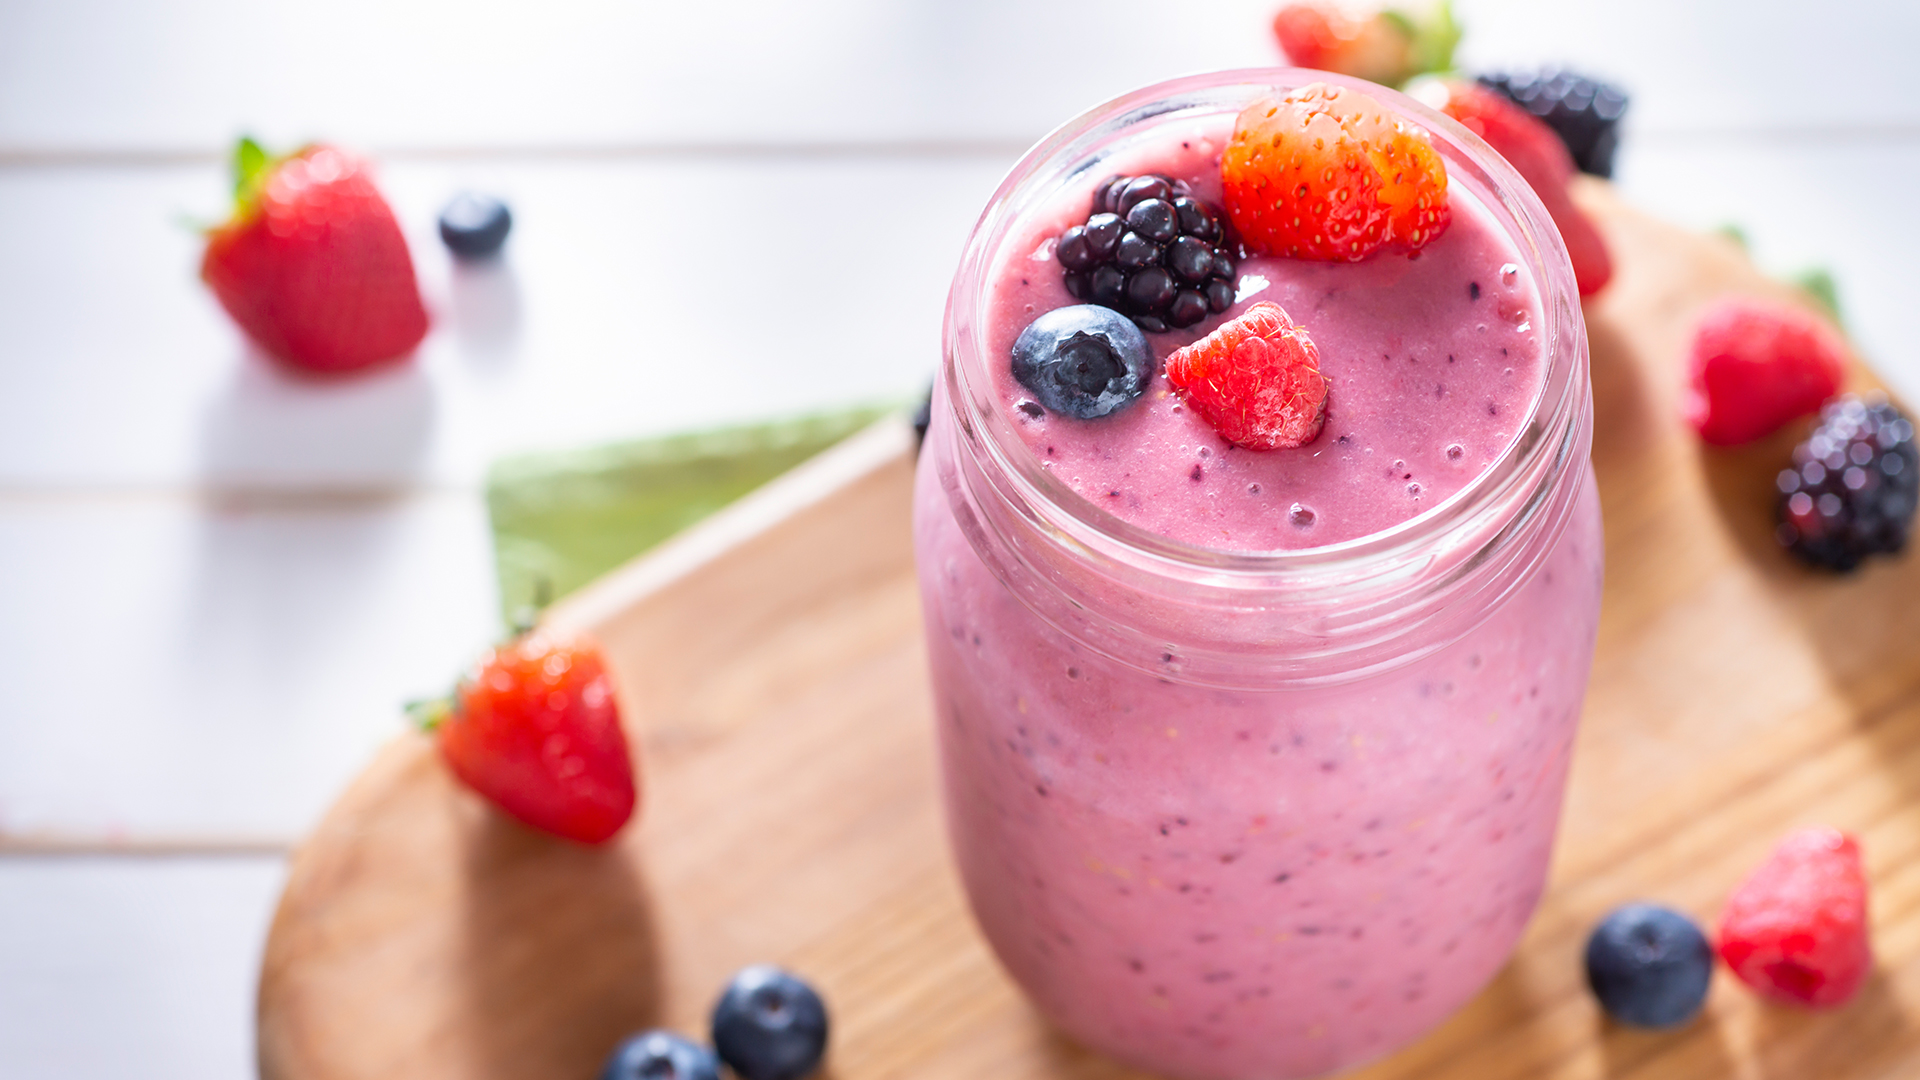 Start your day with a power-packed smoothie, loaded with antioxidant-rich berries